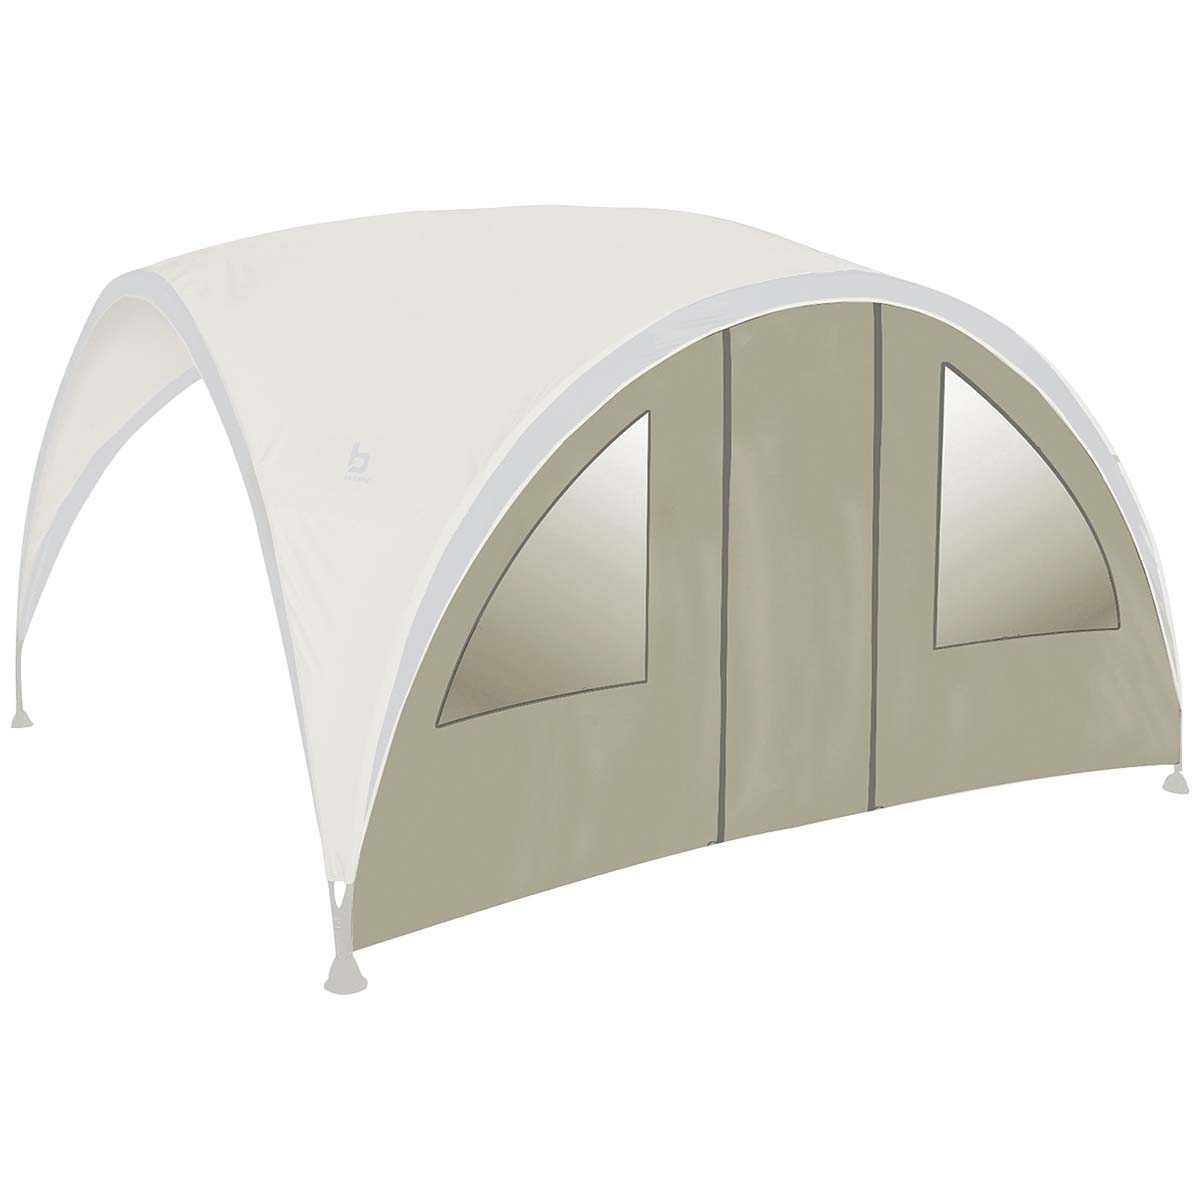 4472220 Bo-Camp - Sidewall - Party Shelter - Polyester - Large - With door and window